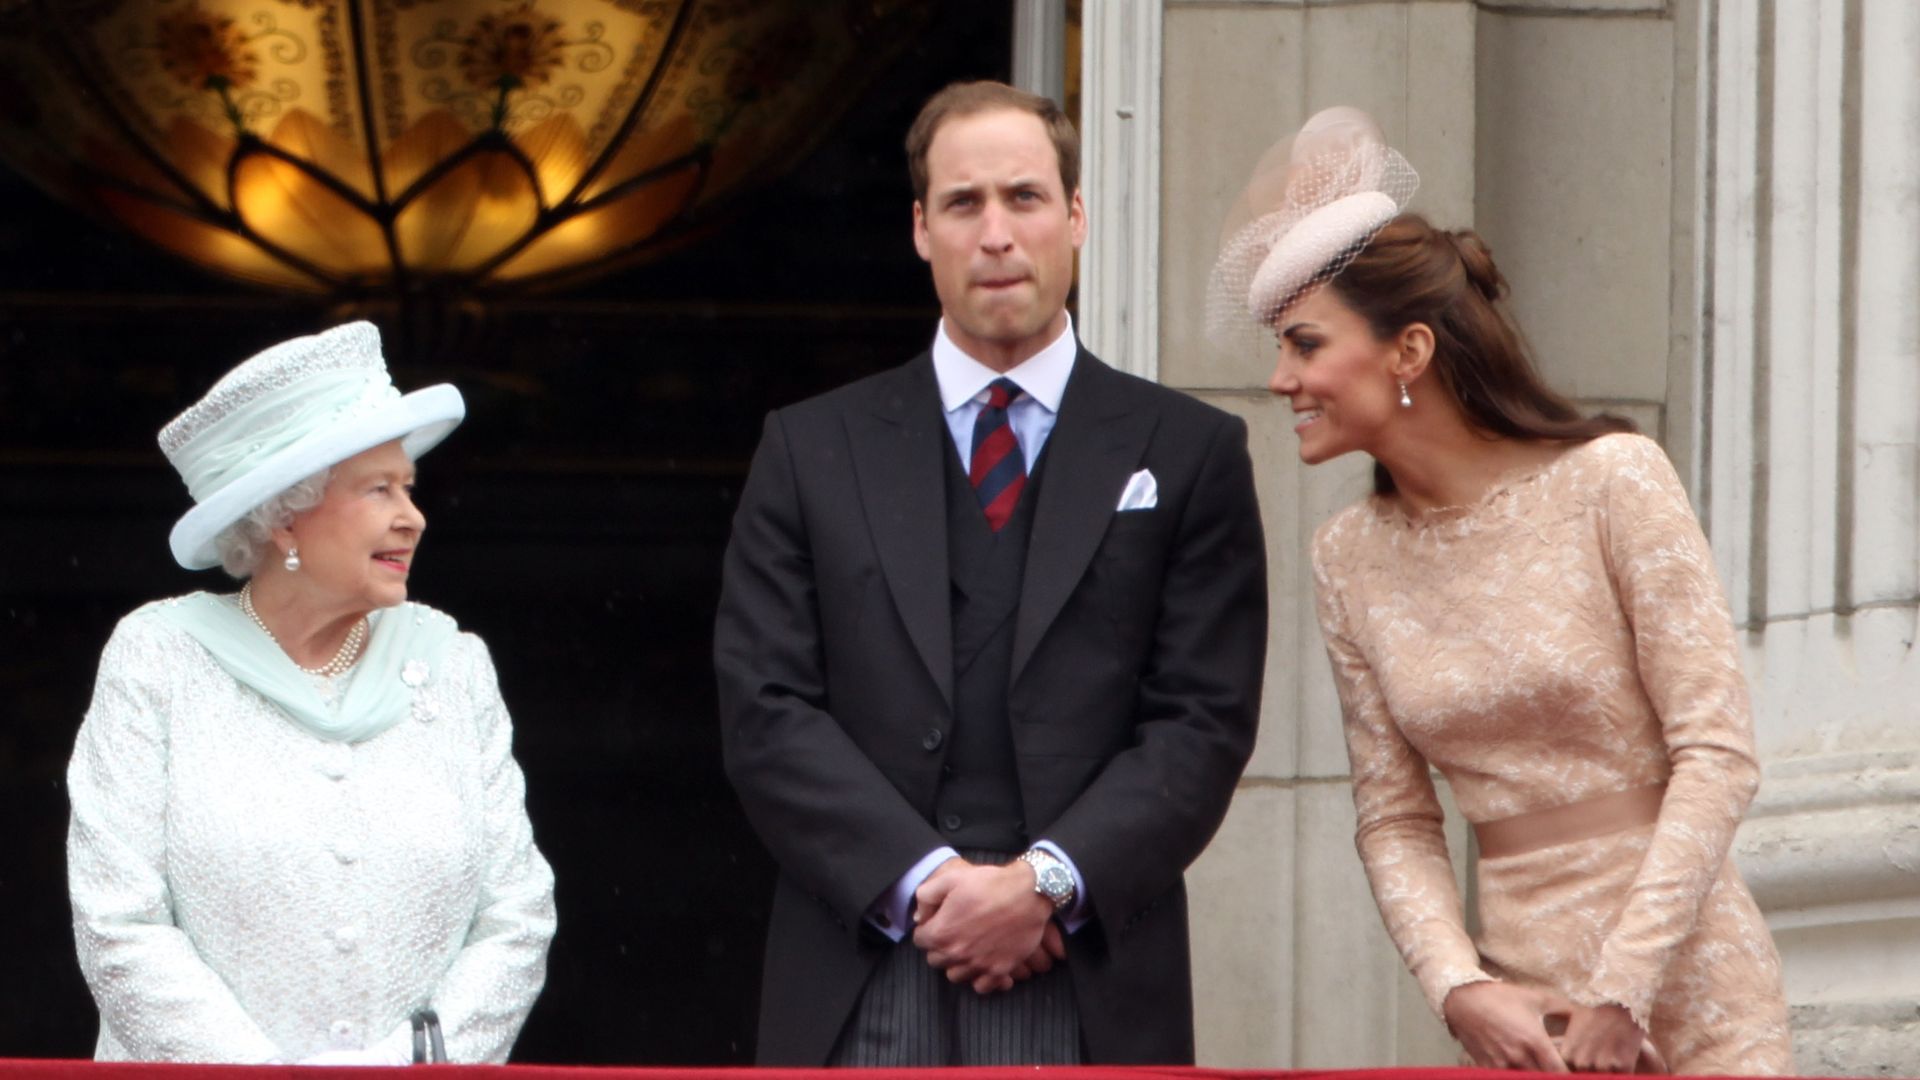 The Queen speaking with Kate Middleton and Prince William at her Diamond Jubilee